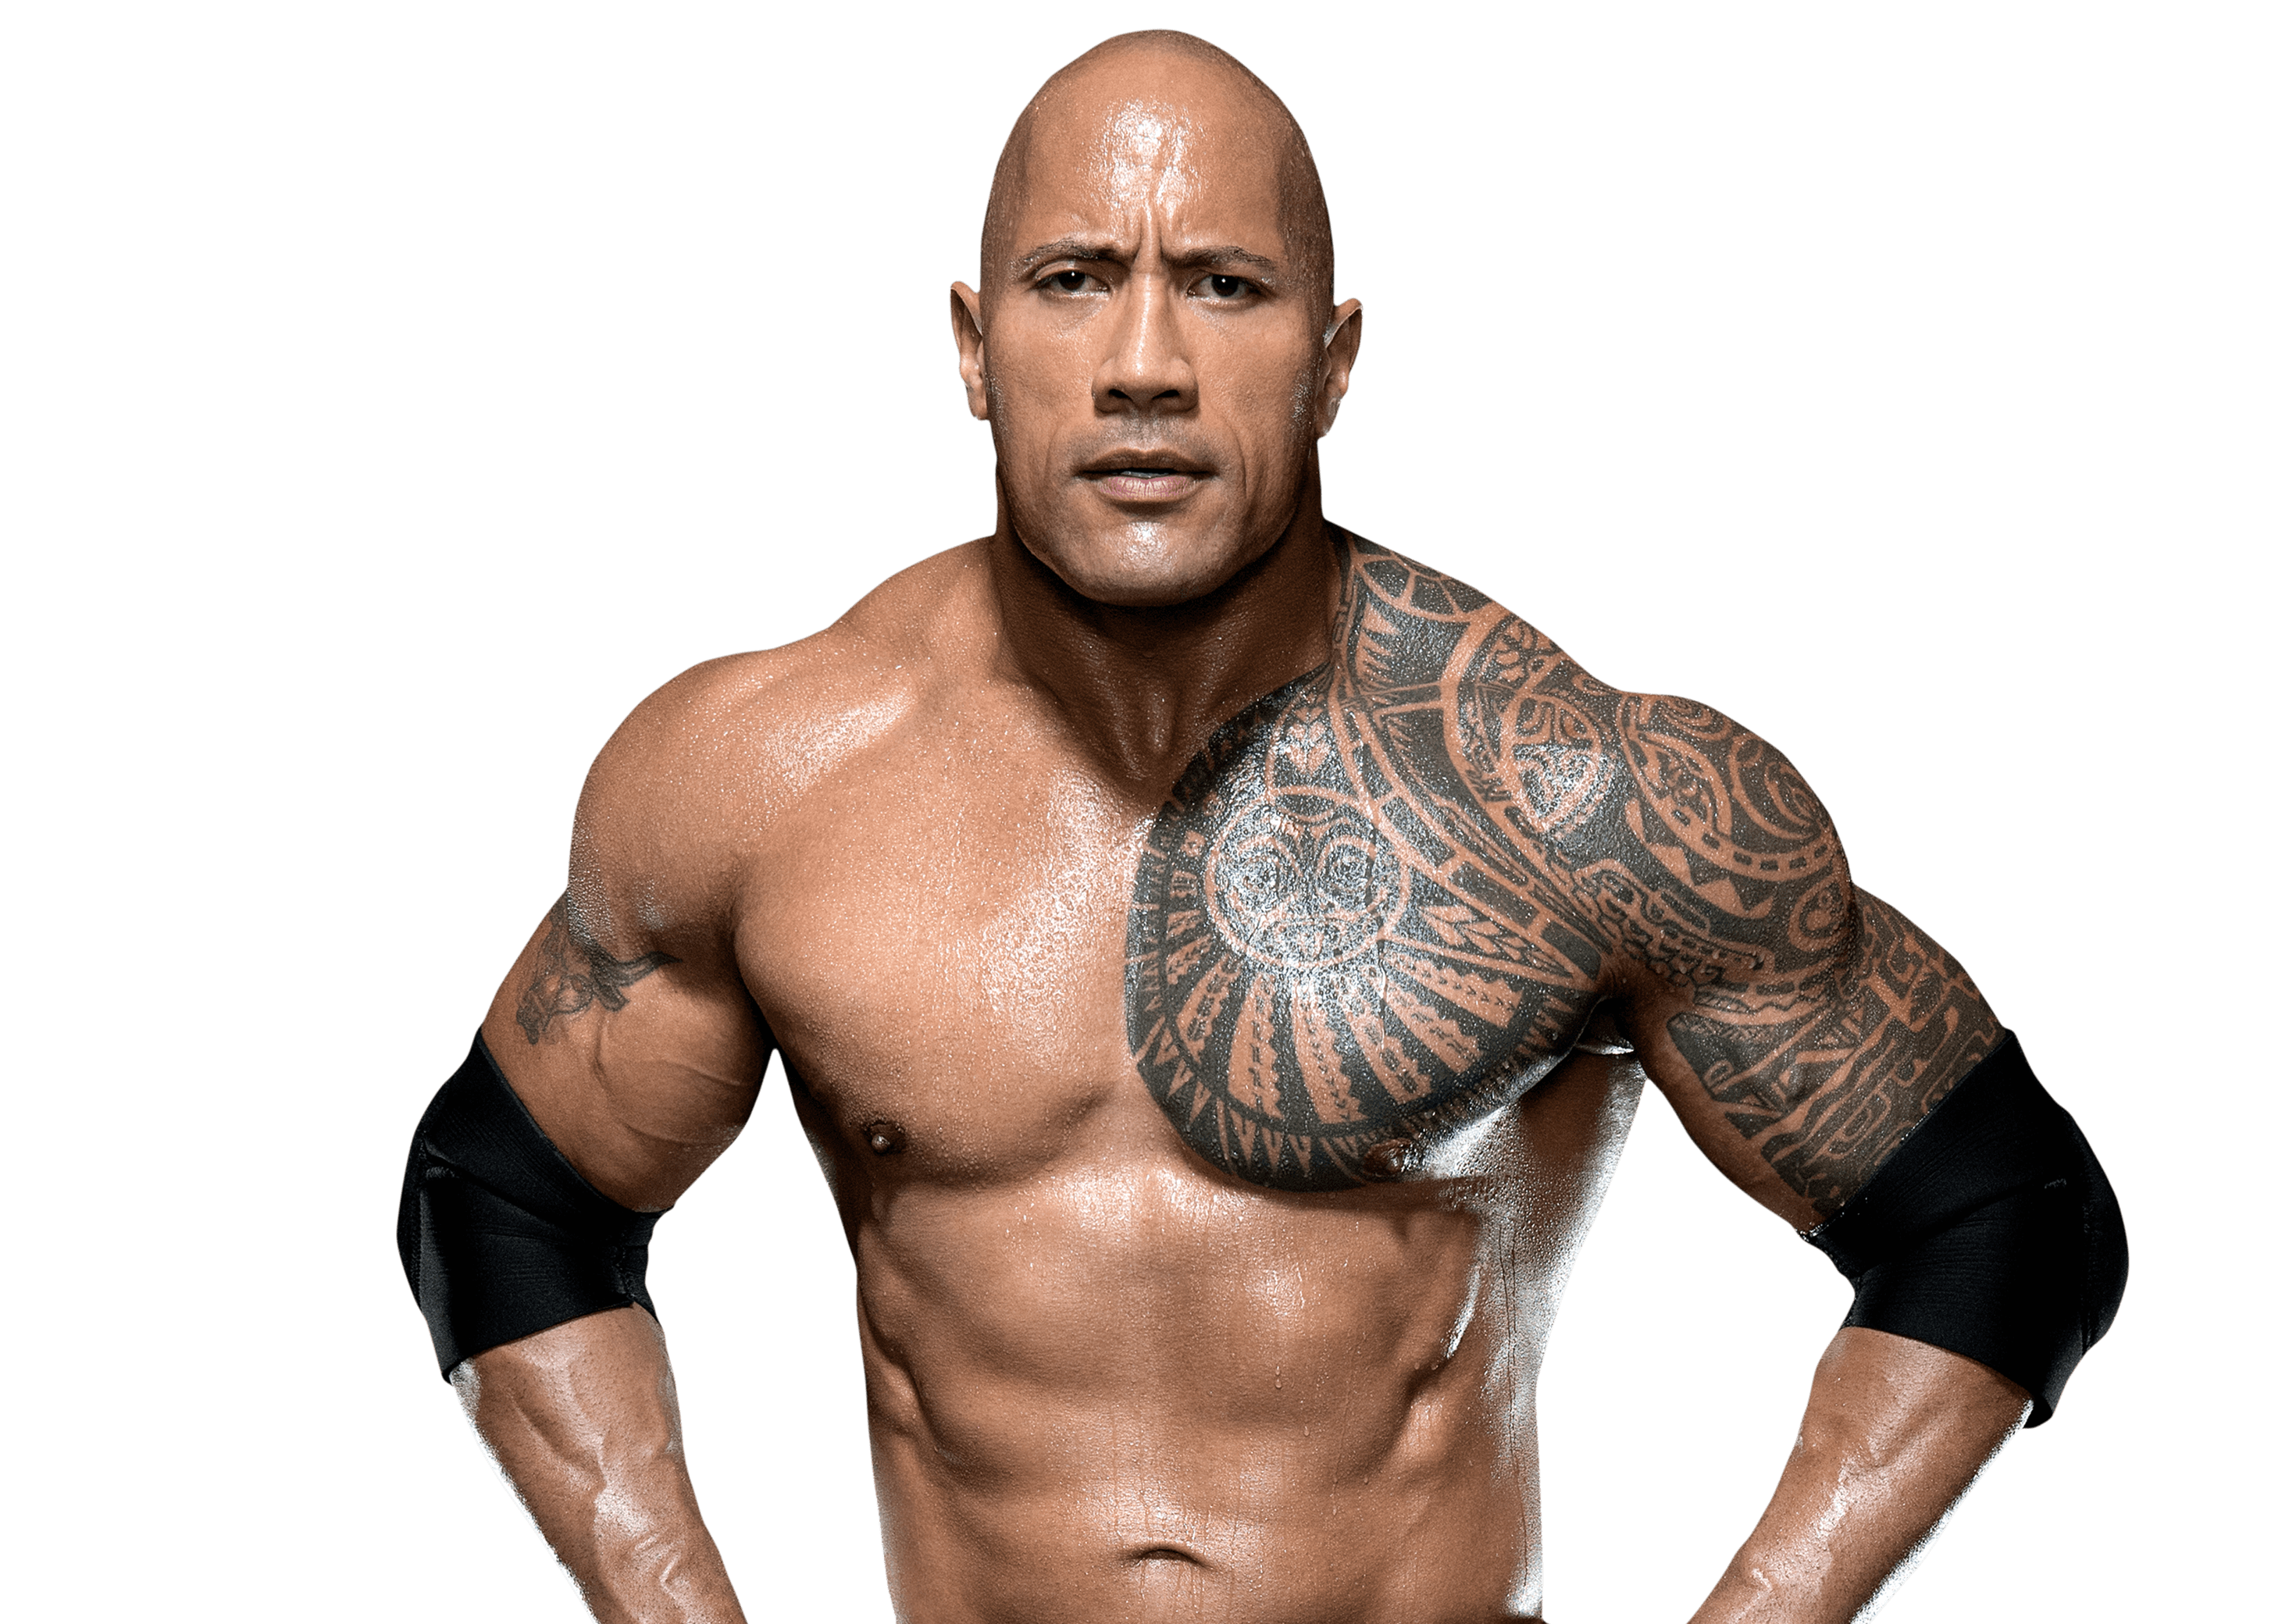 Tattoo uploaded by Joe • The Rock. You can see his awesome traditional  sleeve, but under that belt his the Brahma Bull's first ink. #WWE  #WWESuperstars #Wrestling #TheRock #samoan • Tattoodo